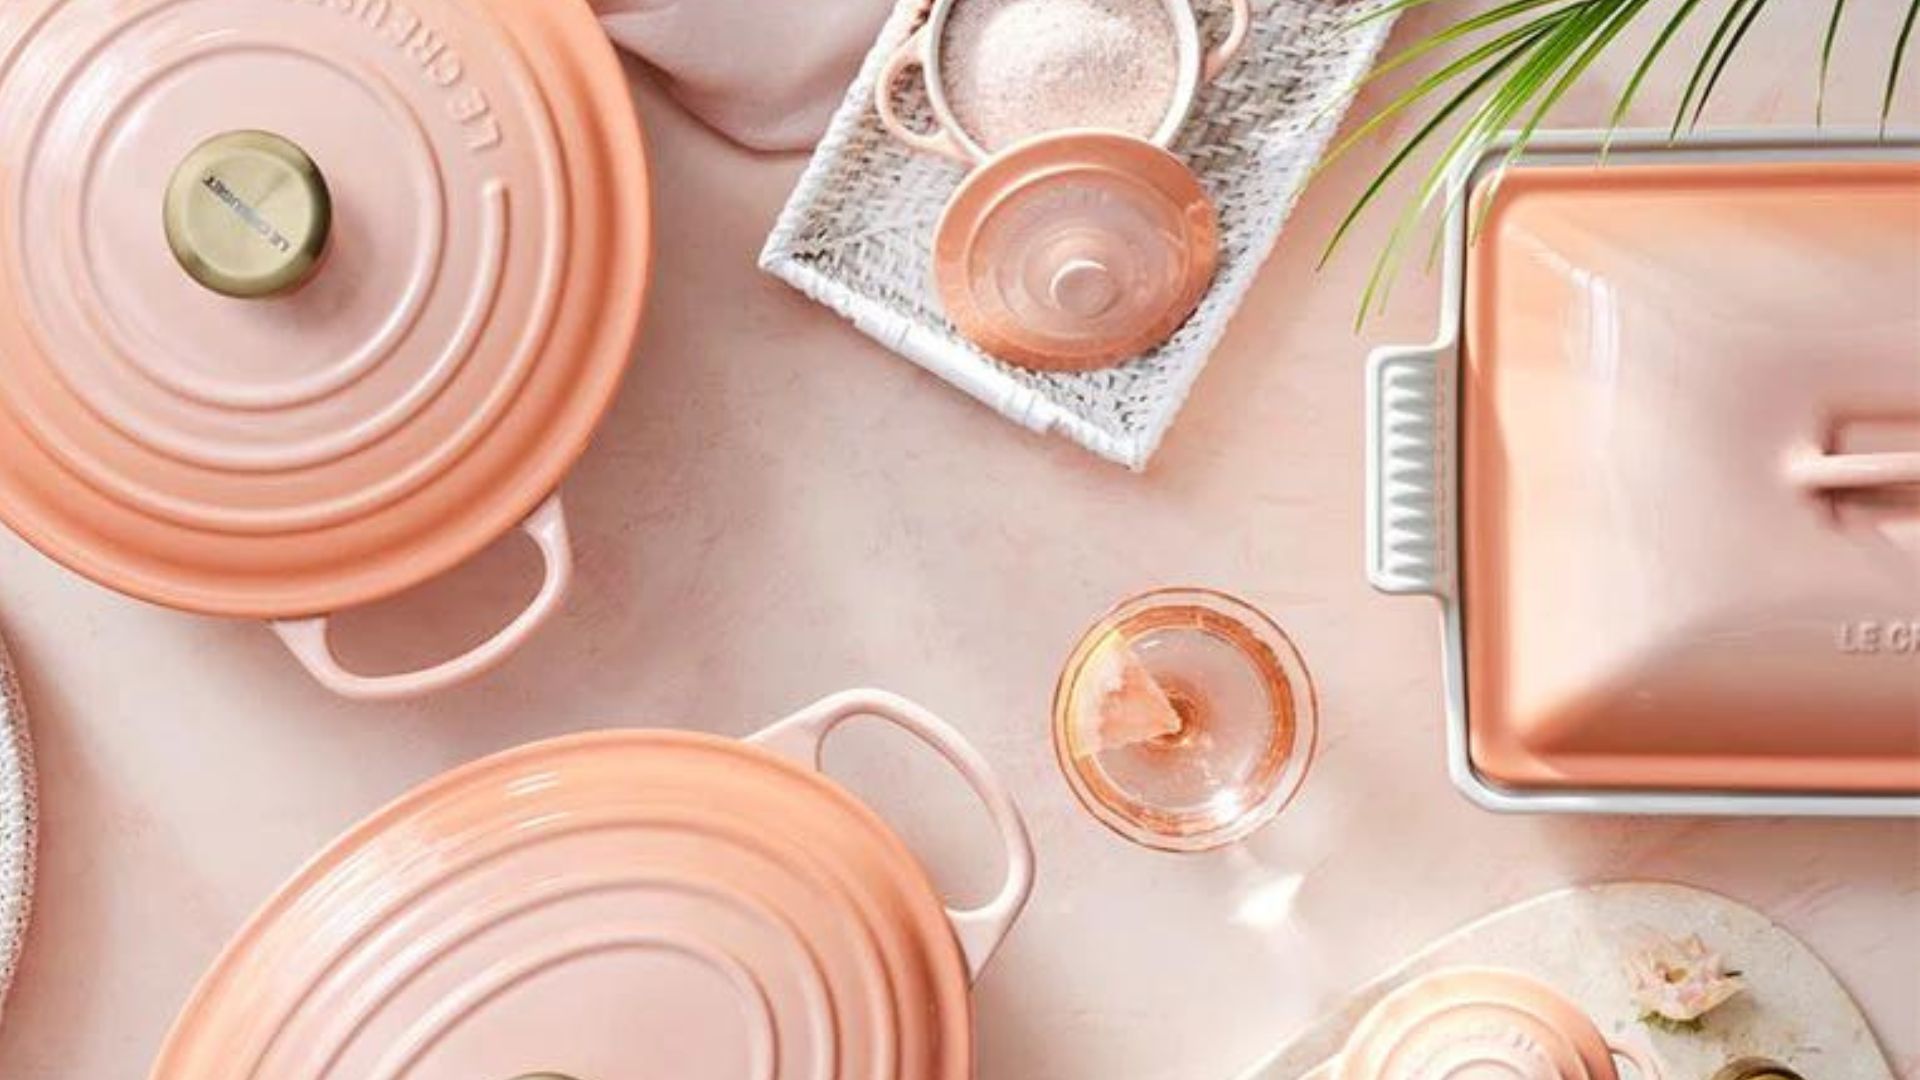 Le Creuset cookware in the new peach color on a peach table. 